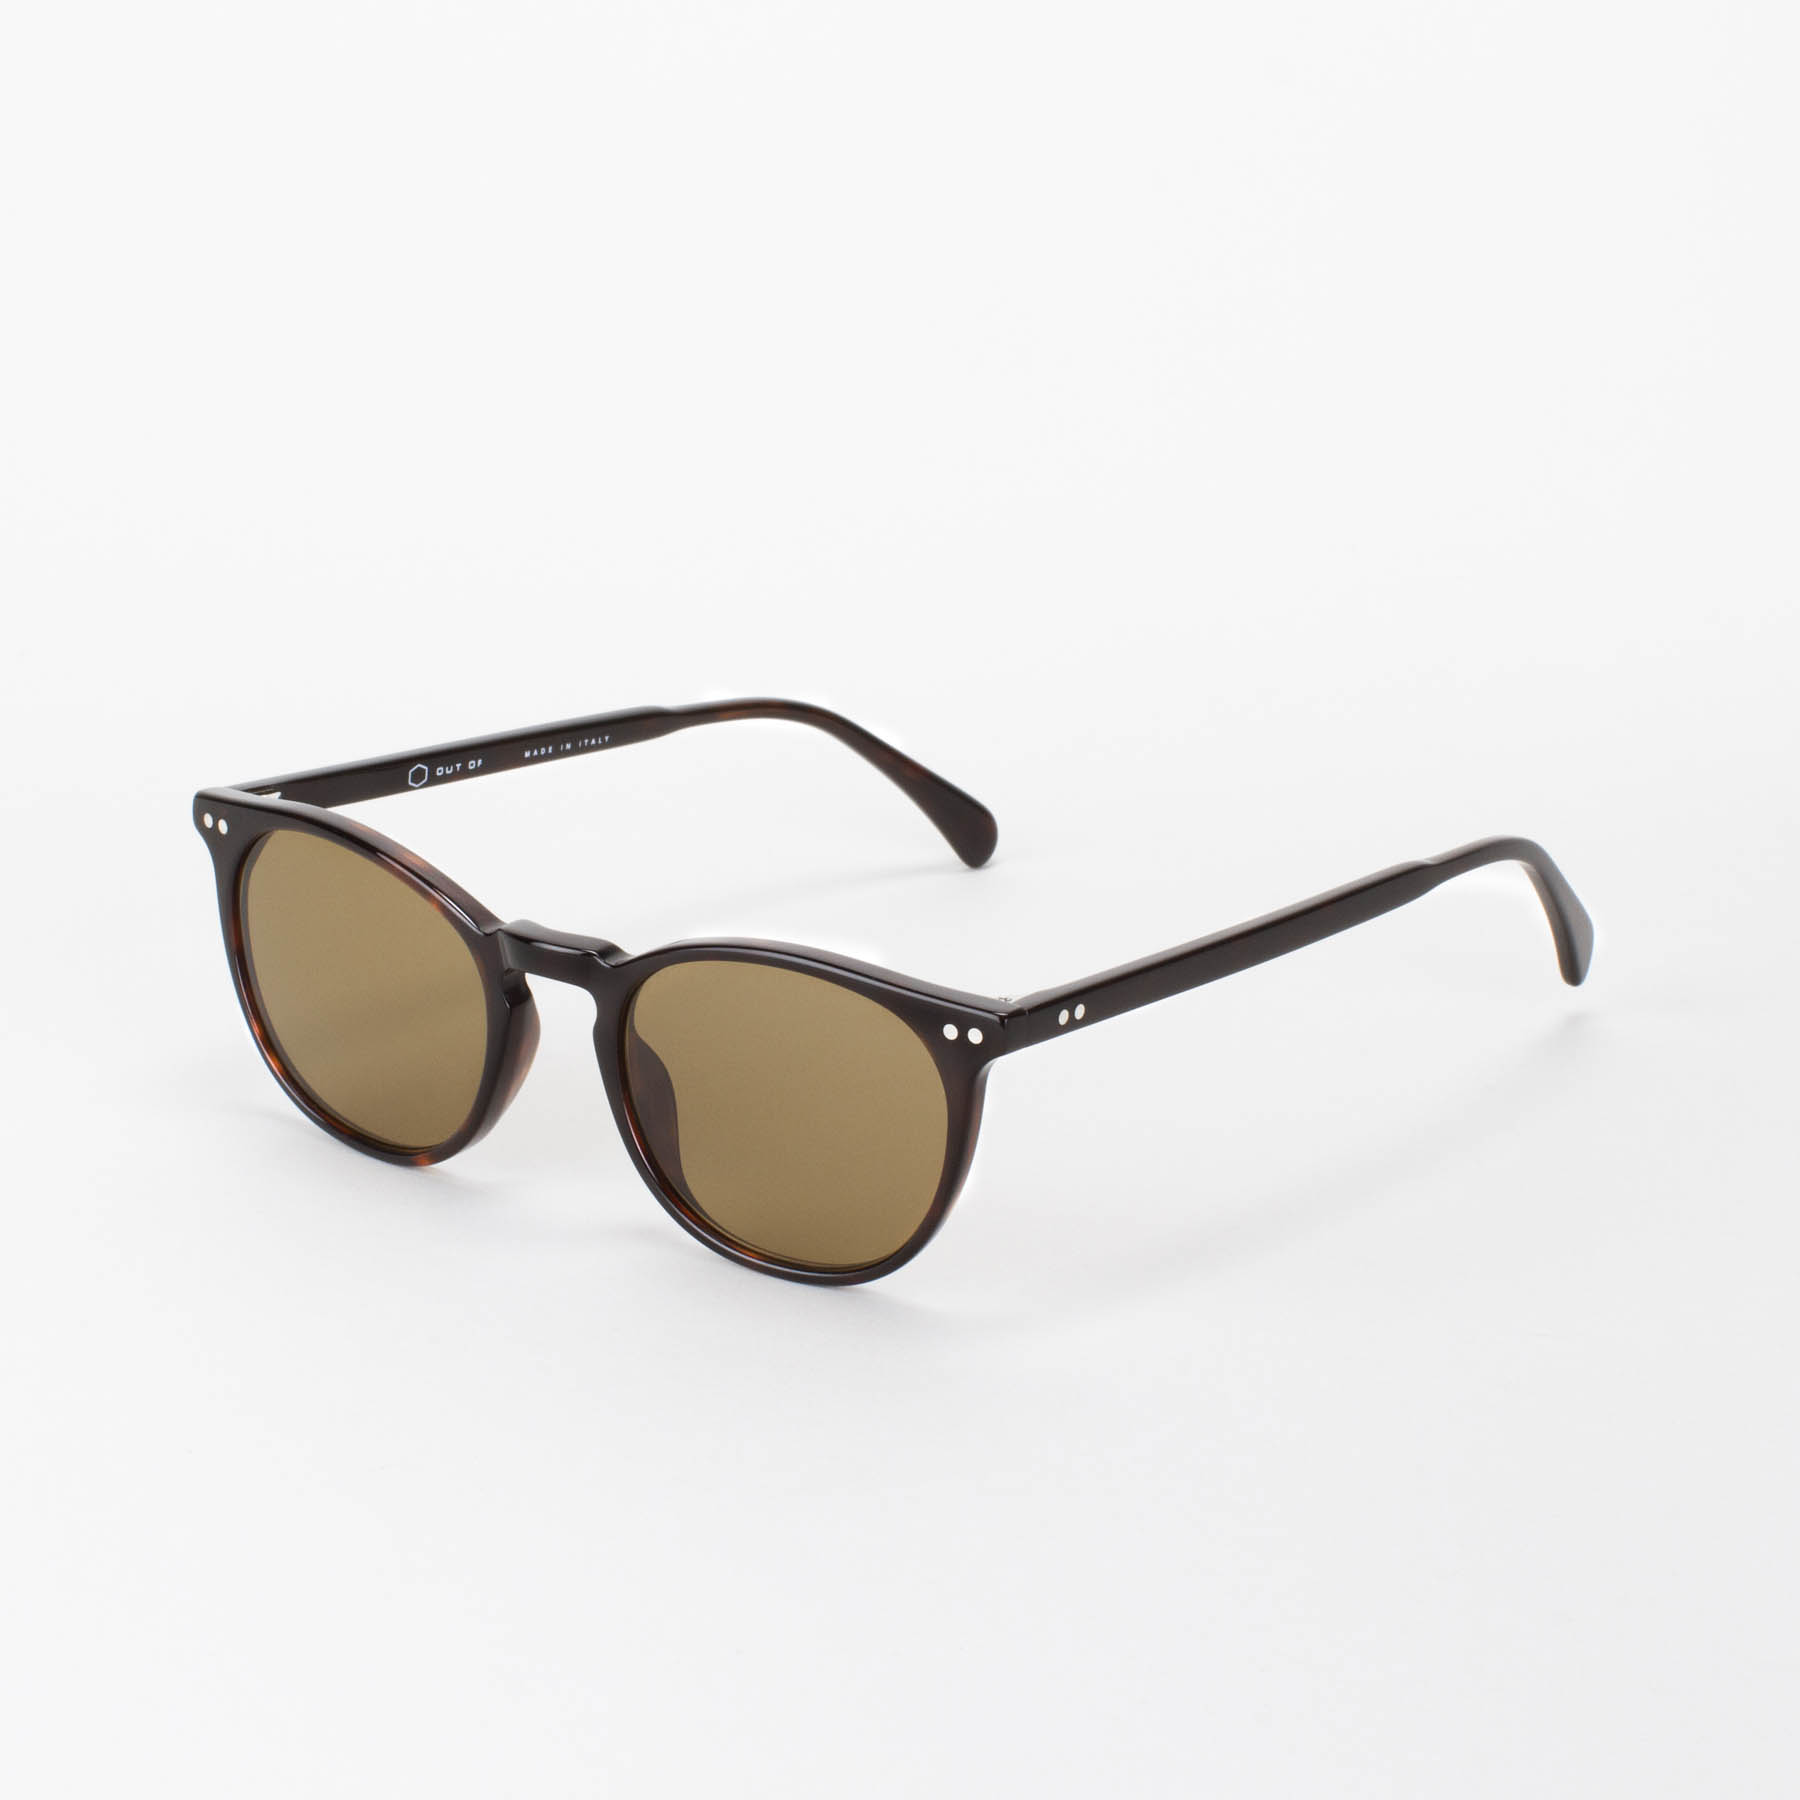 Handmade Modena Turtle with Brown lens